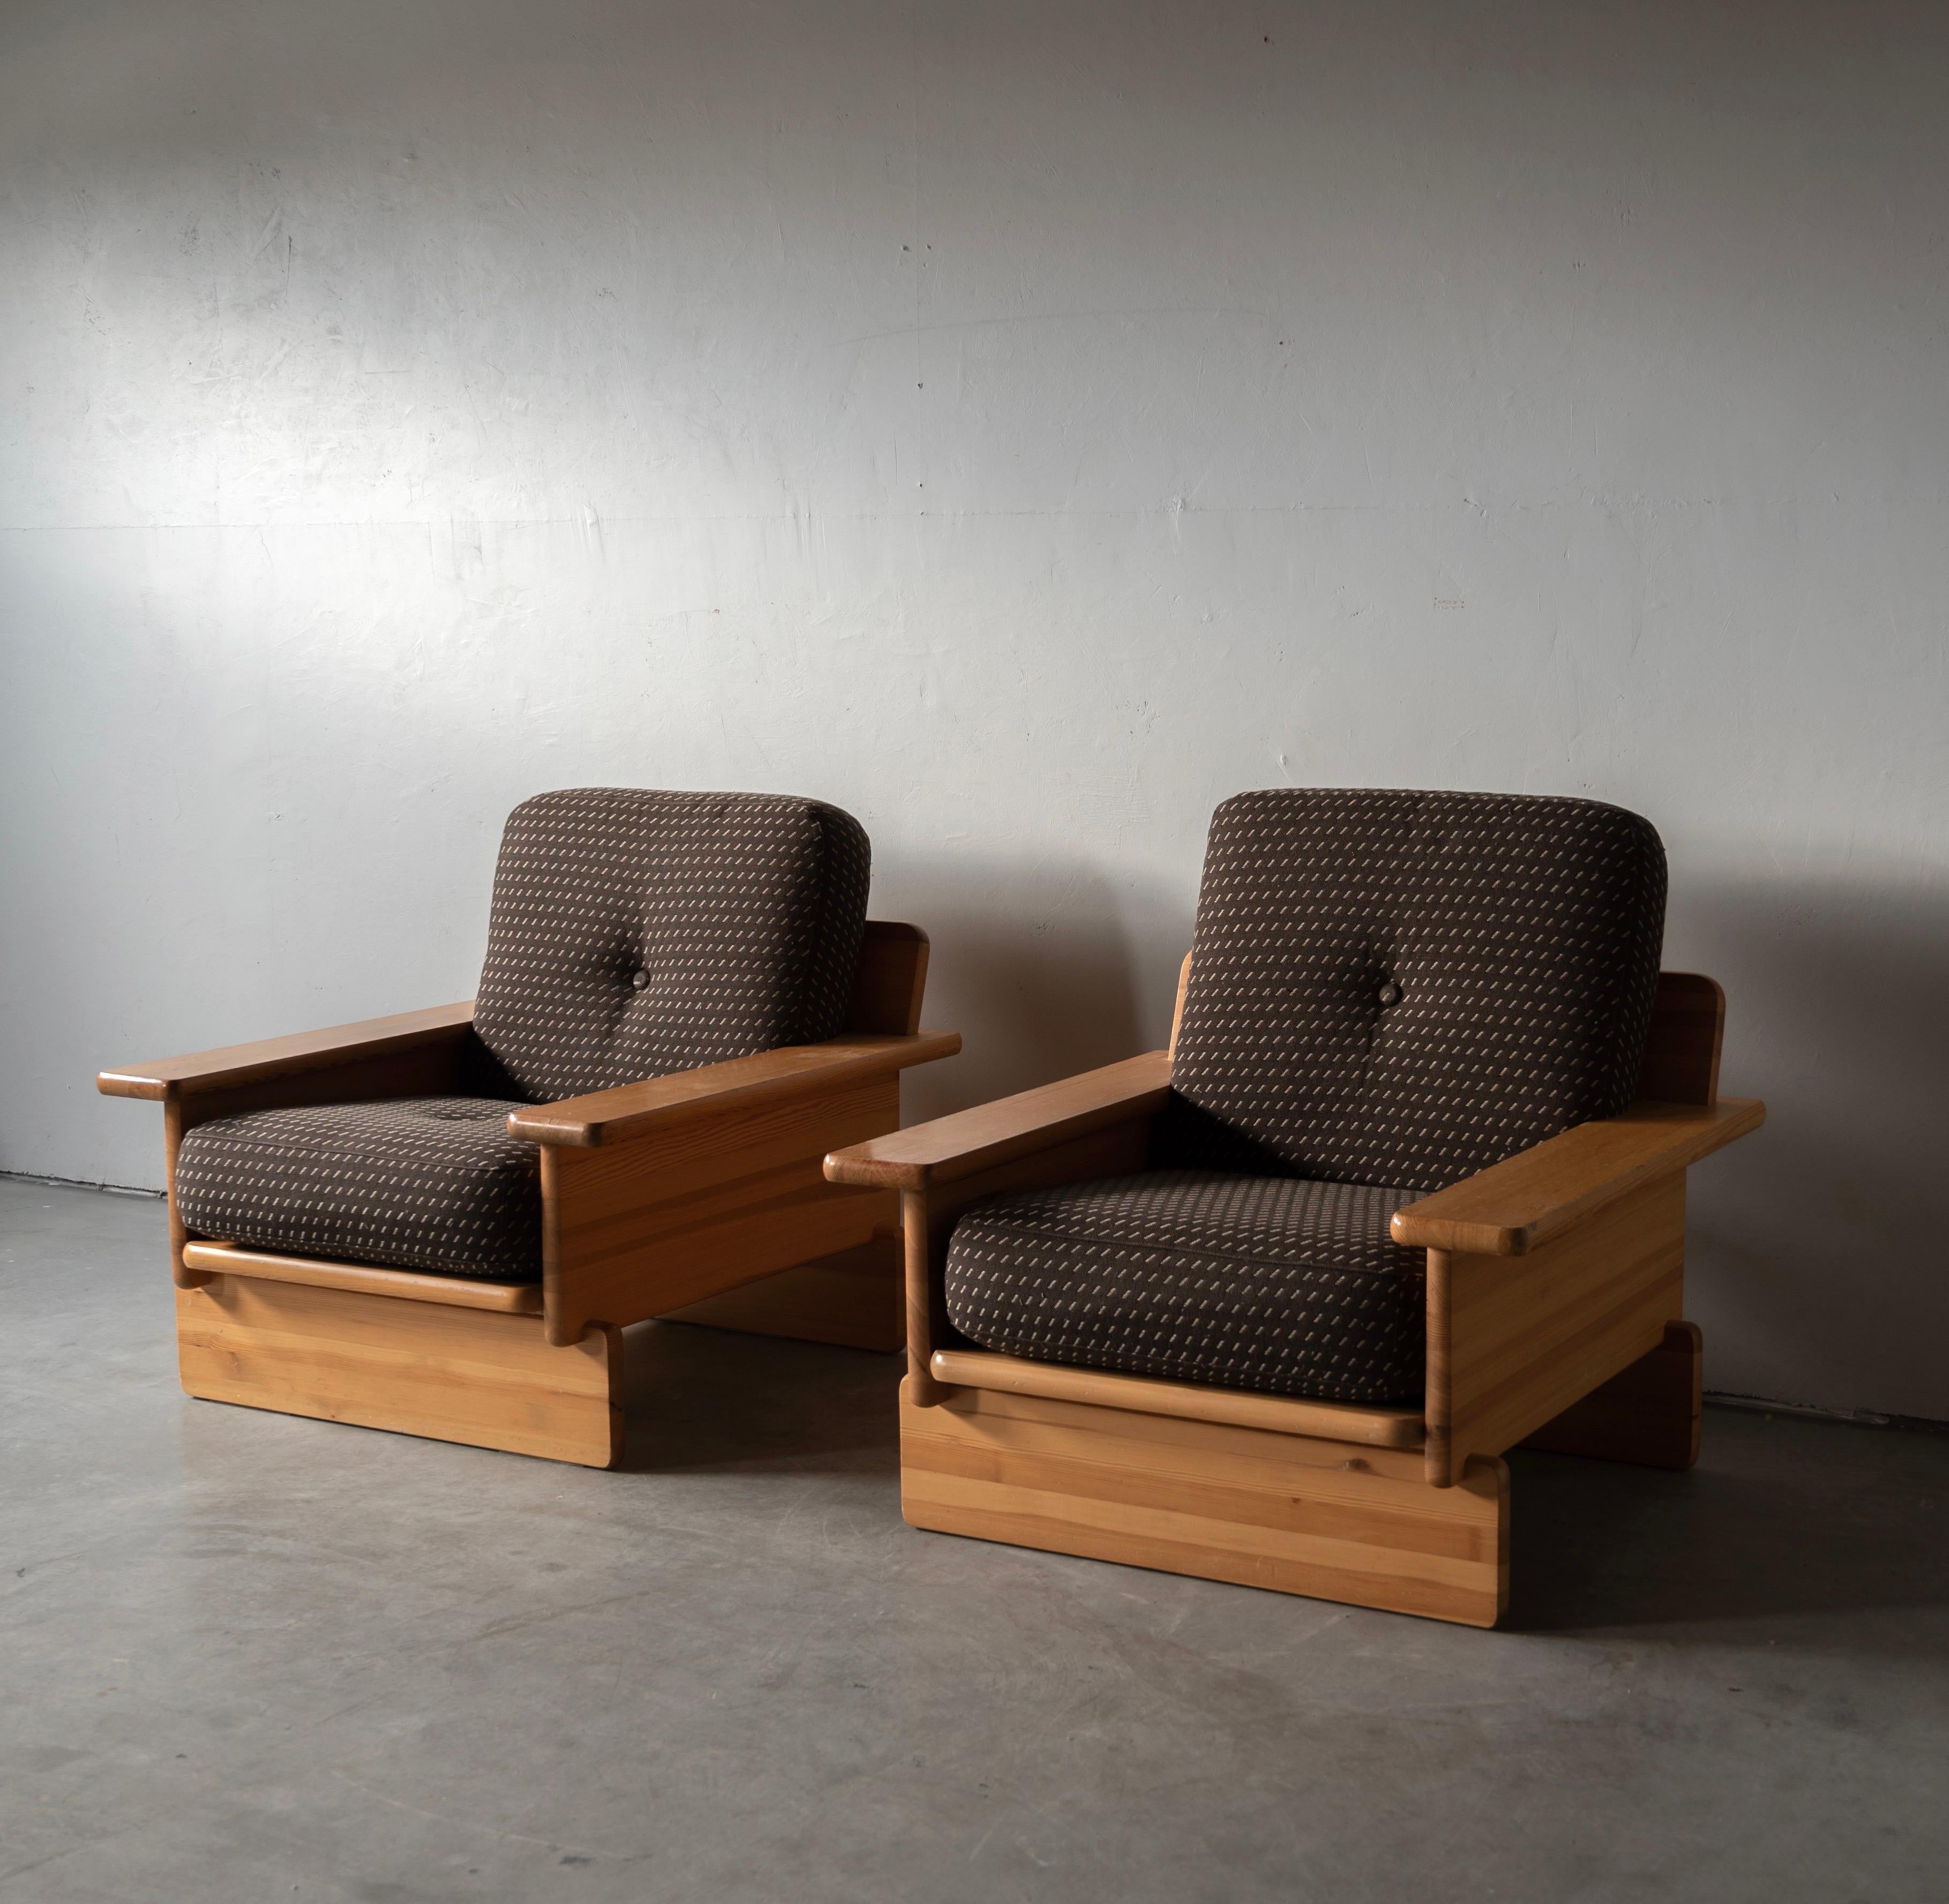 Finnish Swedish Cabinetmaker, Lounge Chairs, Solid Pine, Brown Fabric, Finland, c. 1970s